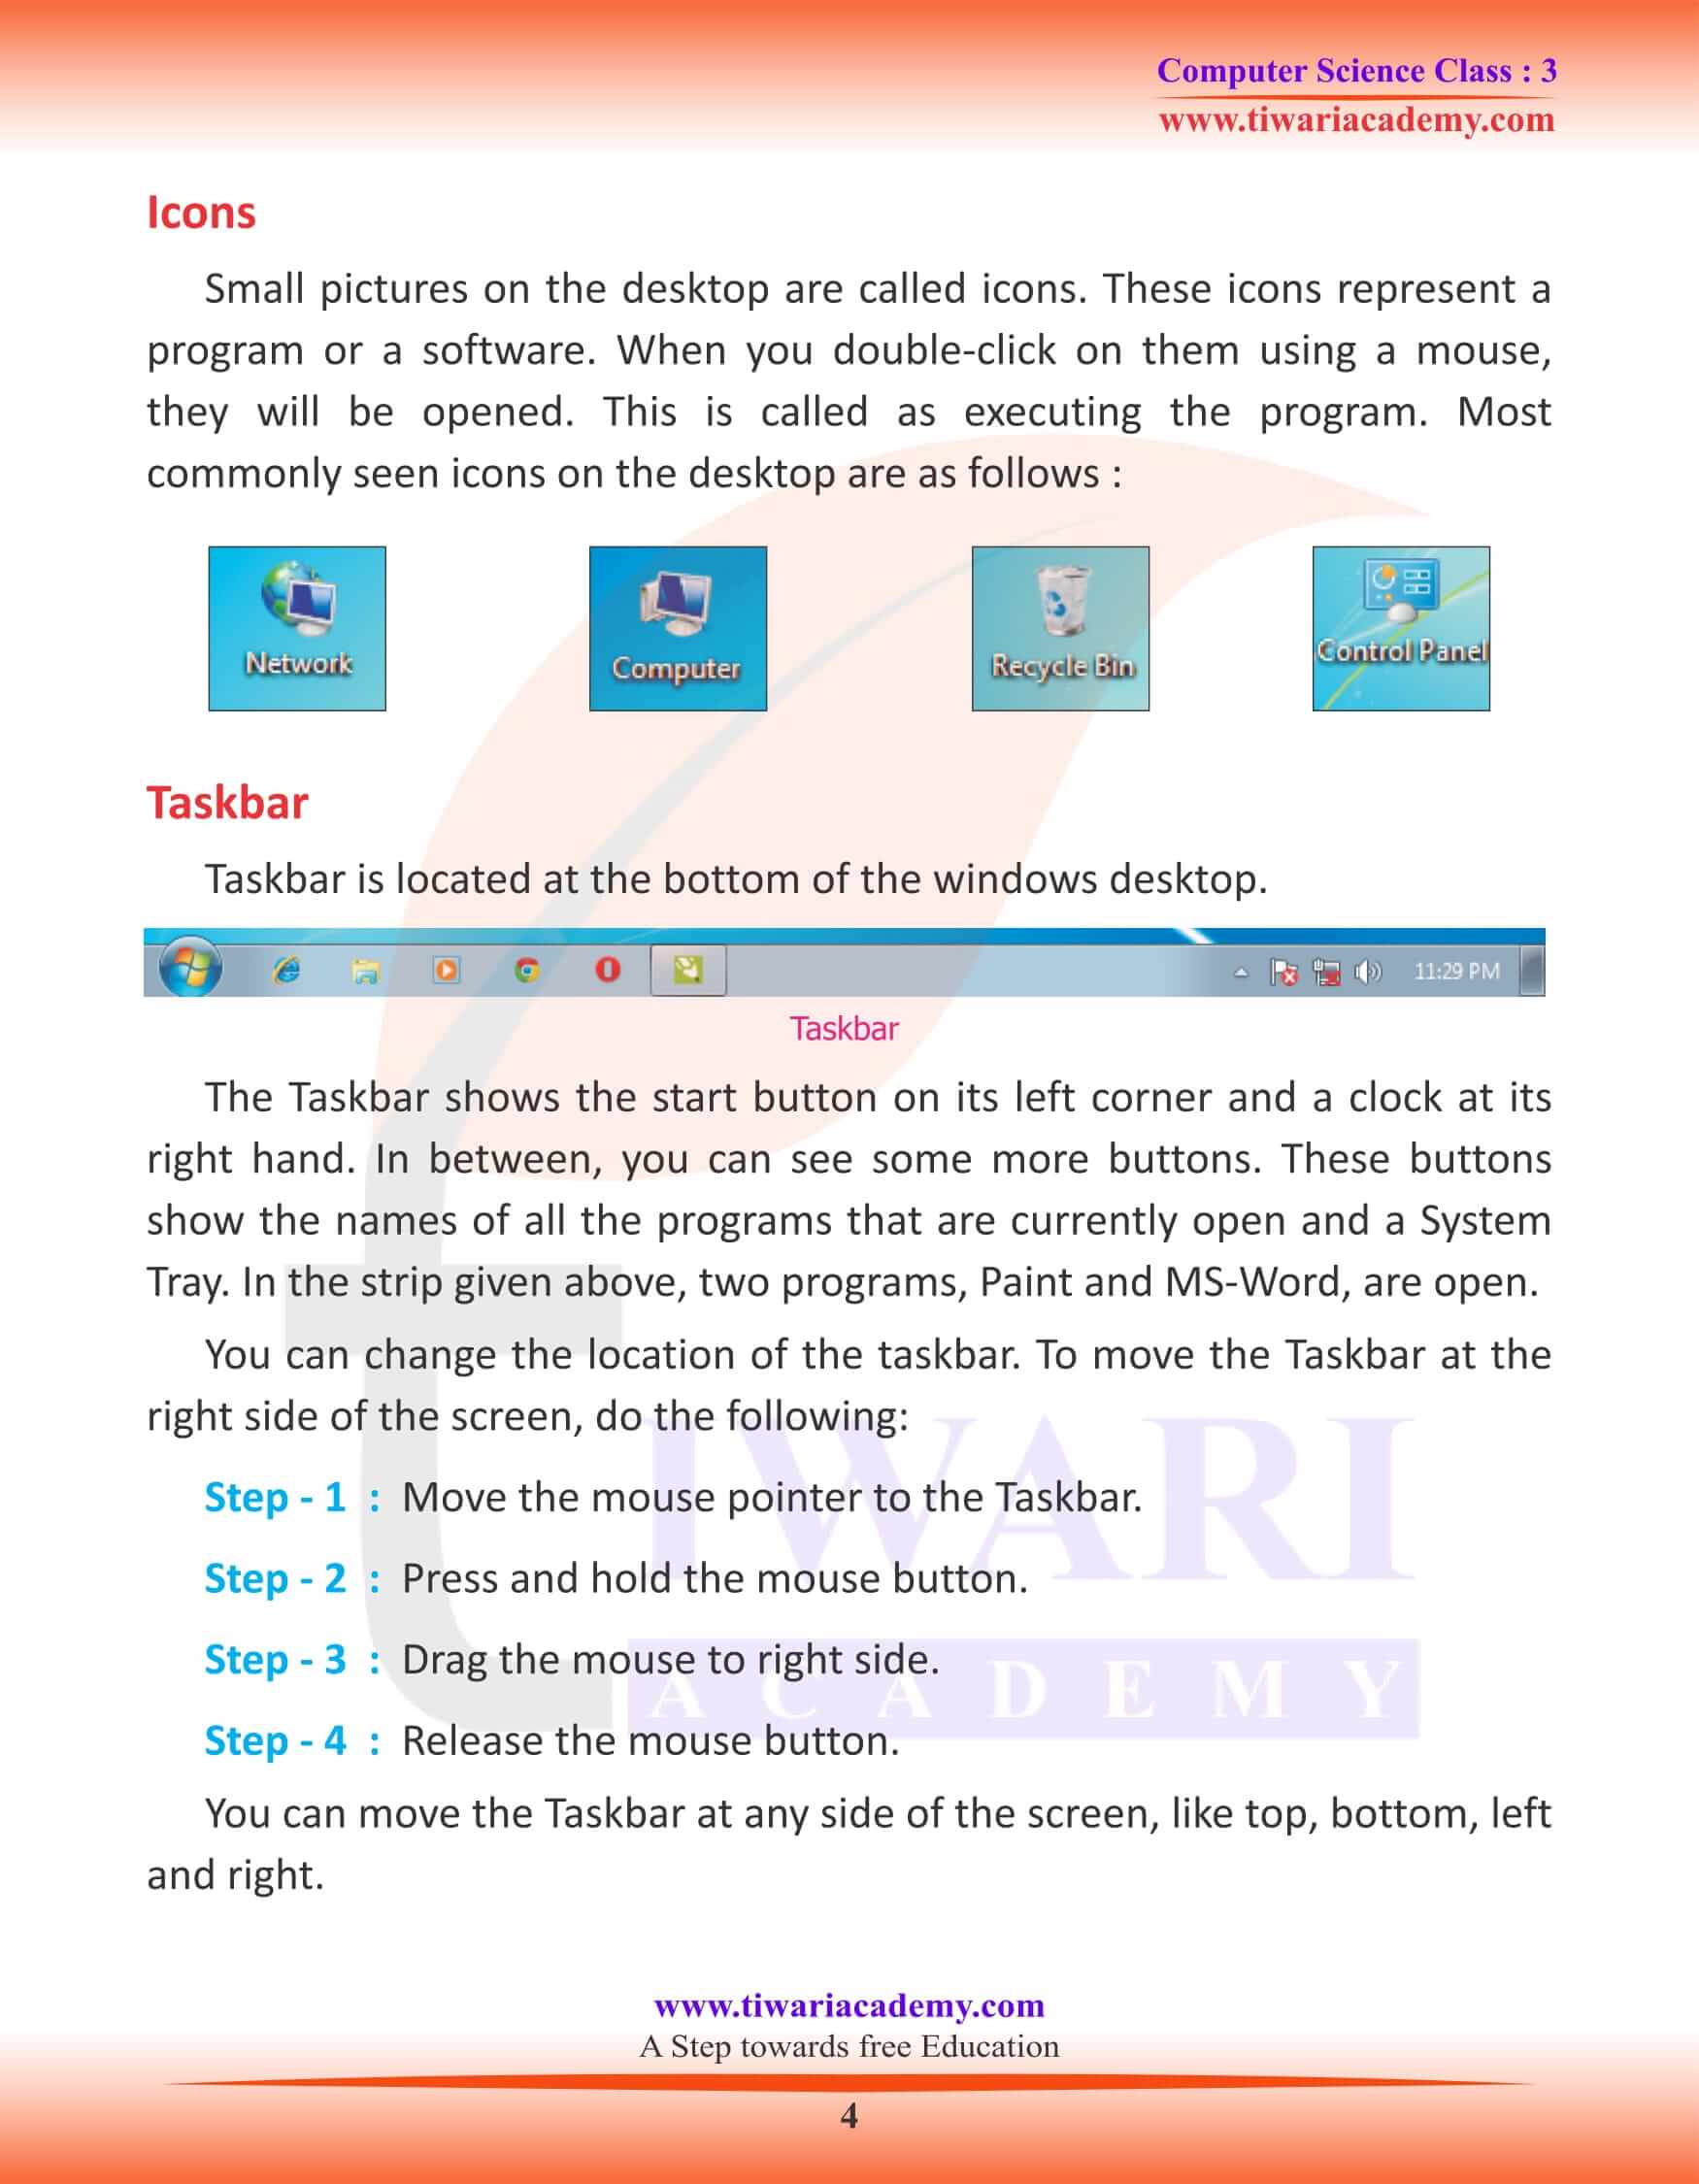 NCERT Solutions for Class 3 Computer Science Chapter 4 Study Material